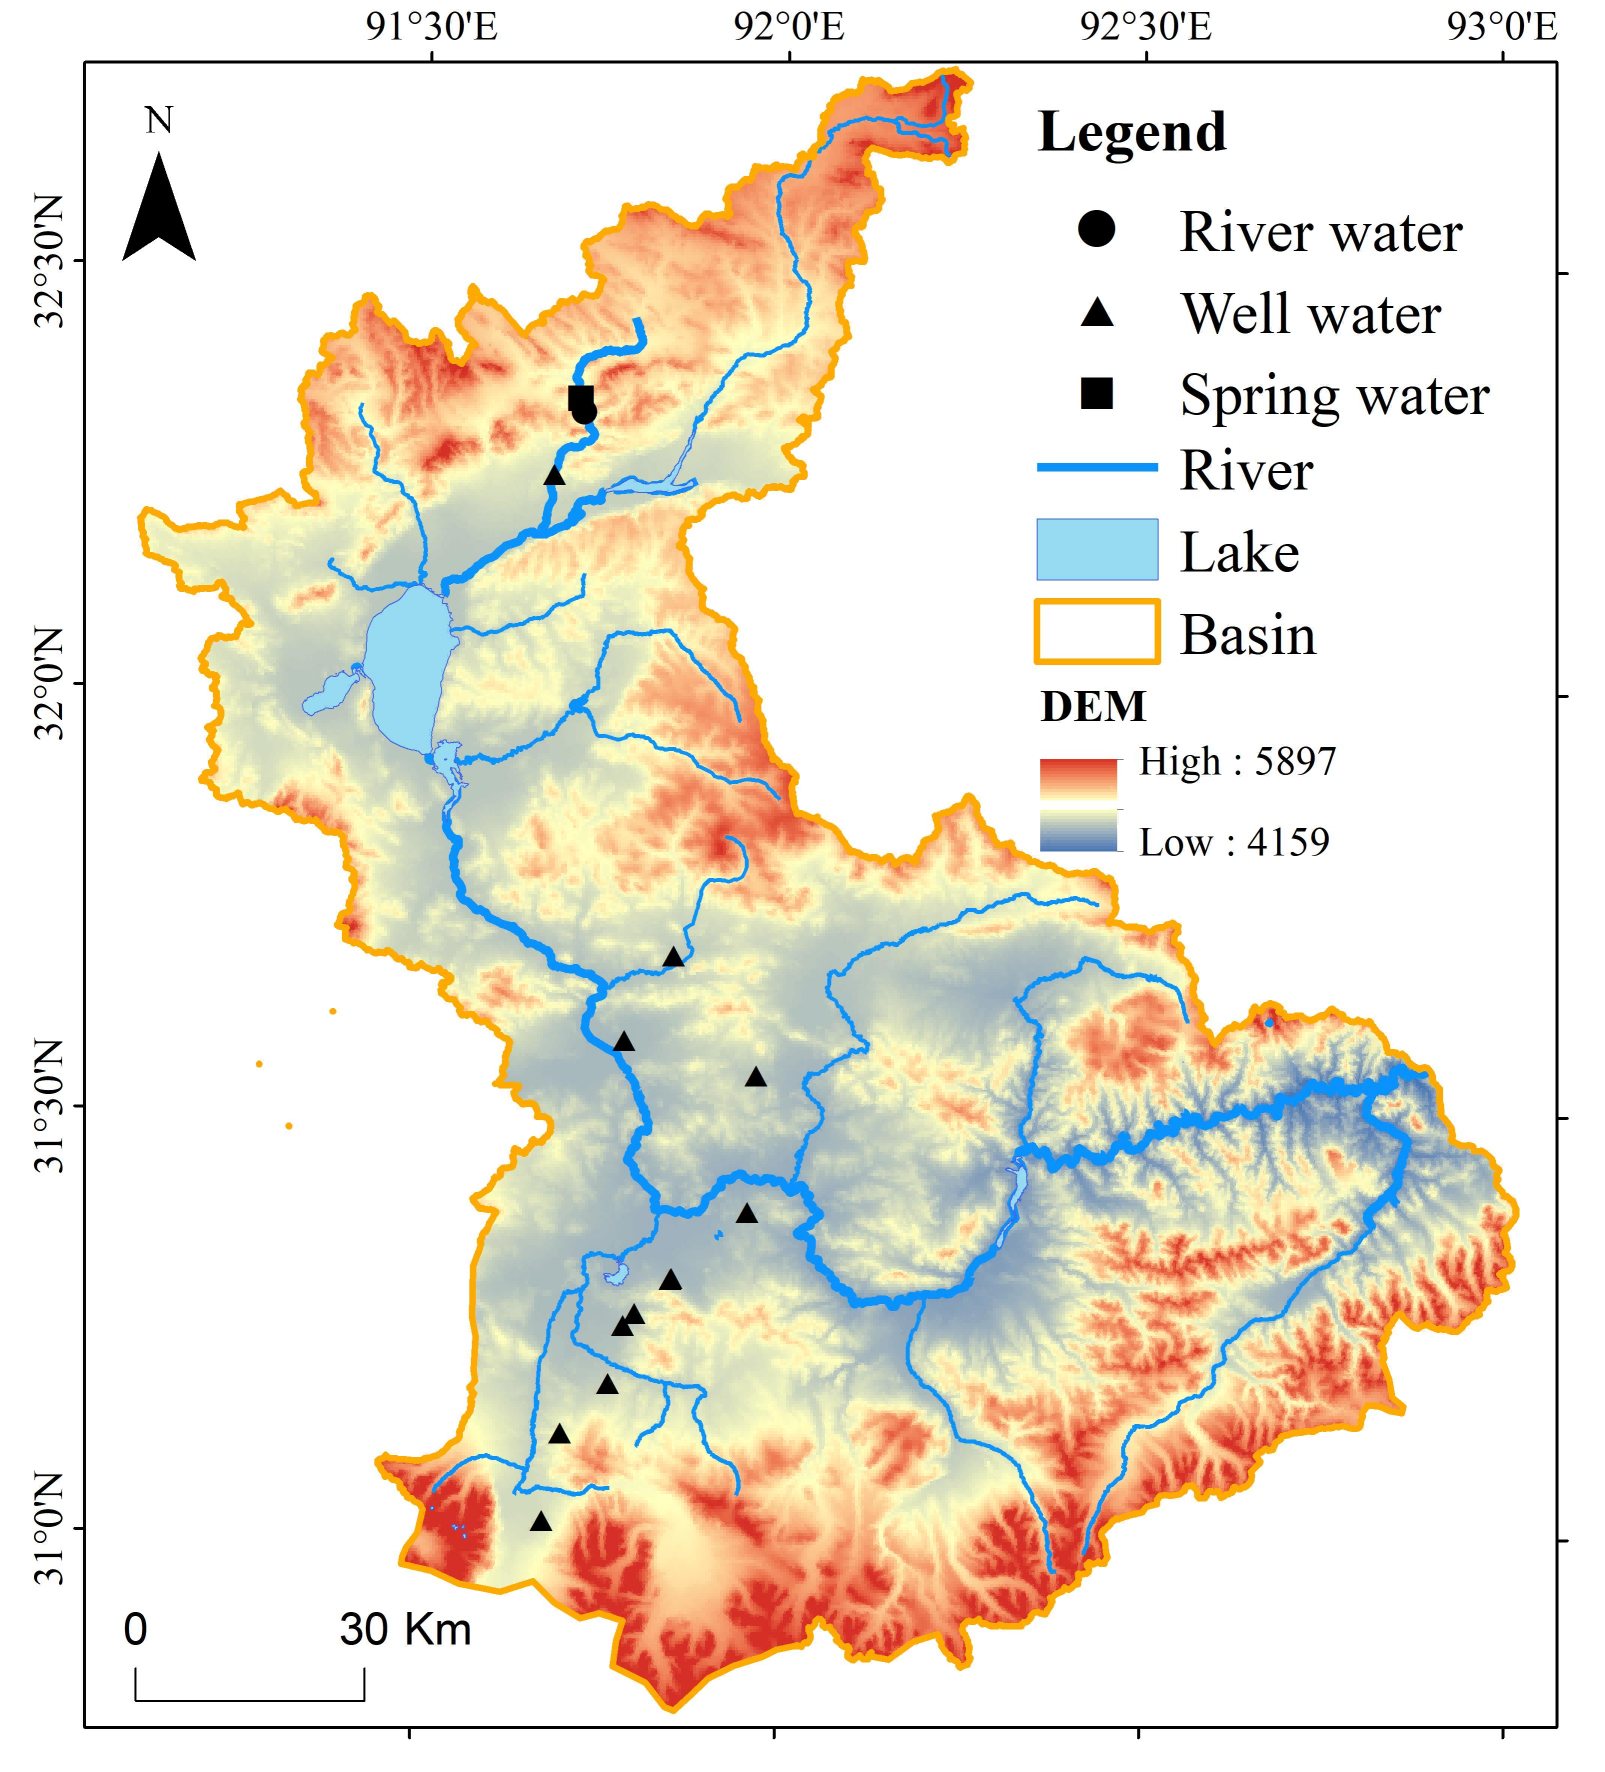 Hydrogen and oxygen stable isotope data set of groundwater and surface water in Naqu basin, the upper reaches of Nujiang River (2020-2021)